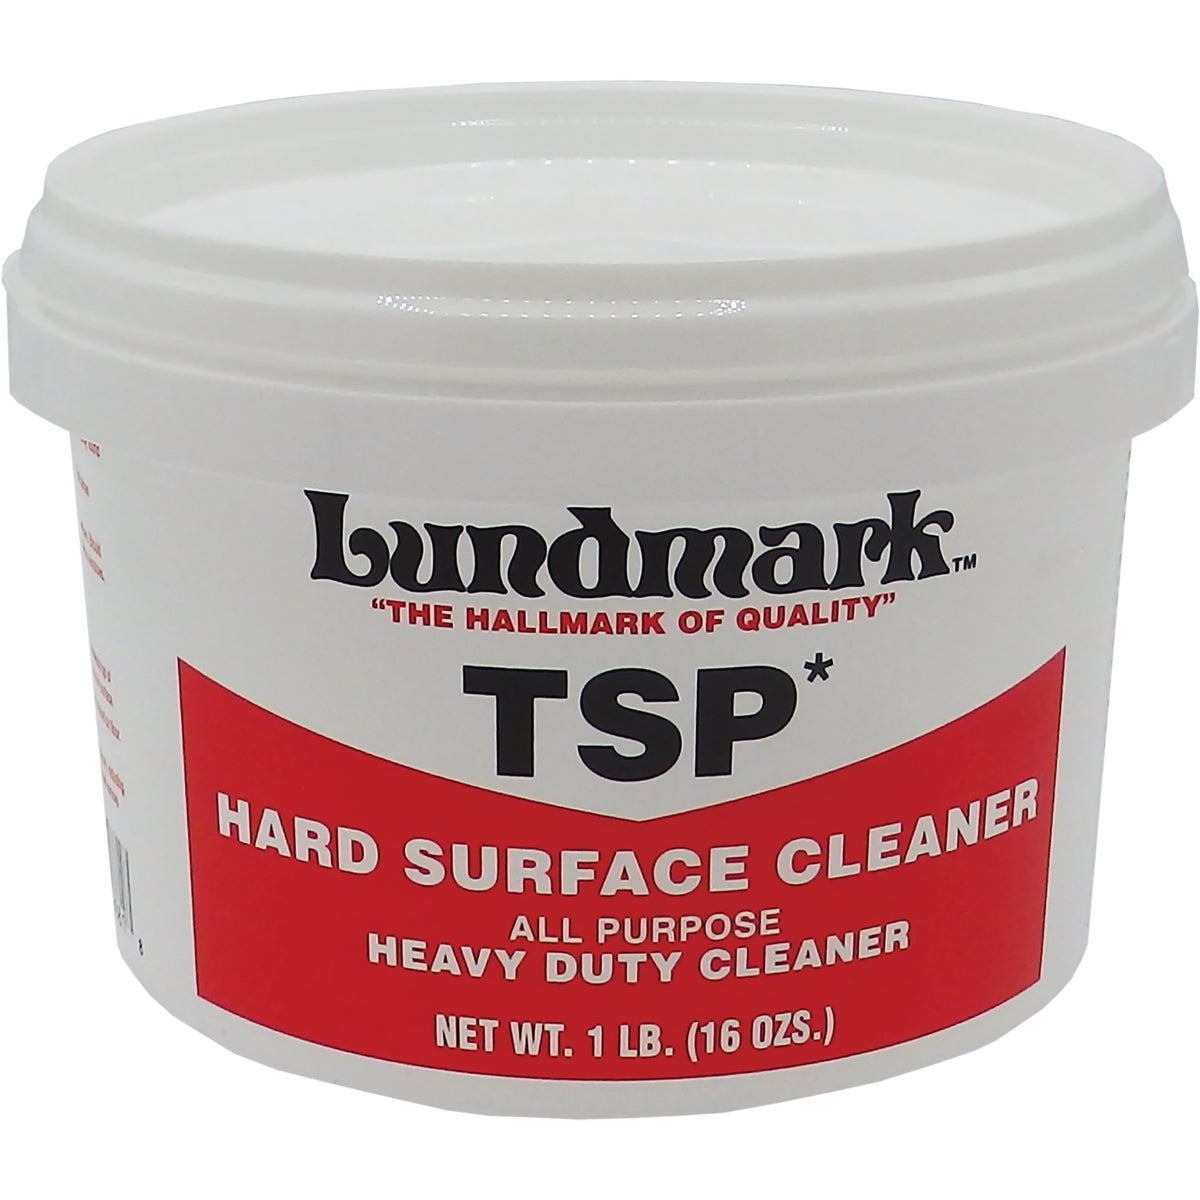 Item 774237, All-purpose heavy-duty powdered cleaner.